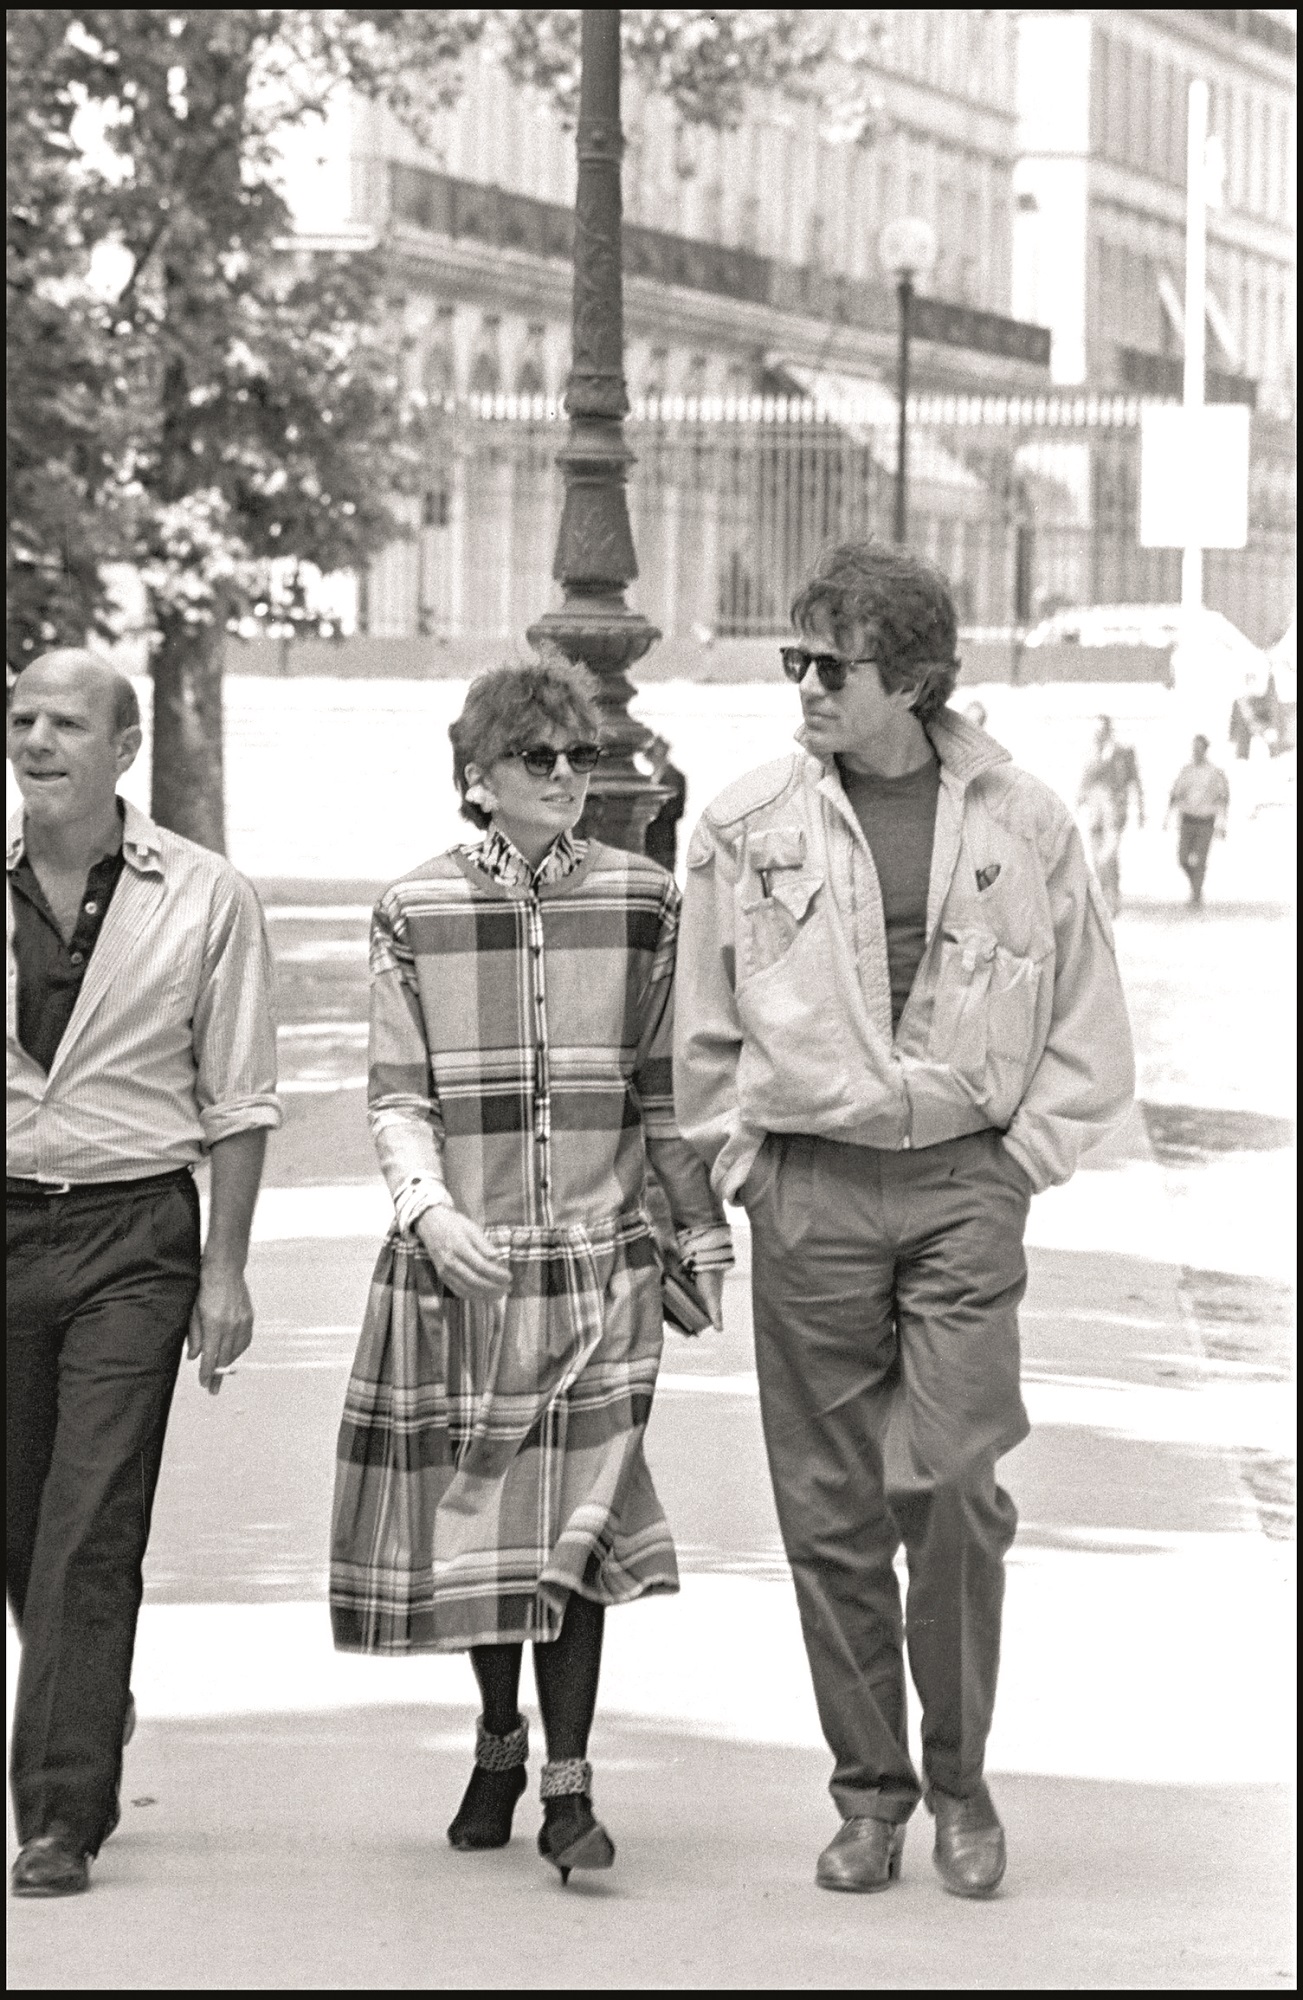 Diane Keaton and Warren Beatty strolling in the Jardin Des Tuileries, Paris, 1983. (Photo by Bertrand Rindoff Petroff/Getty Images)